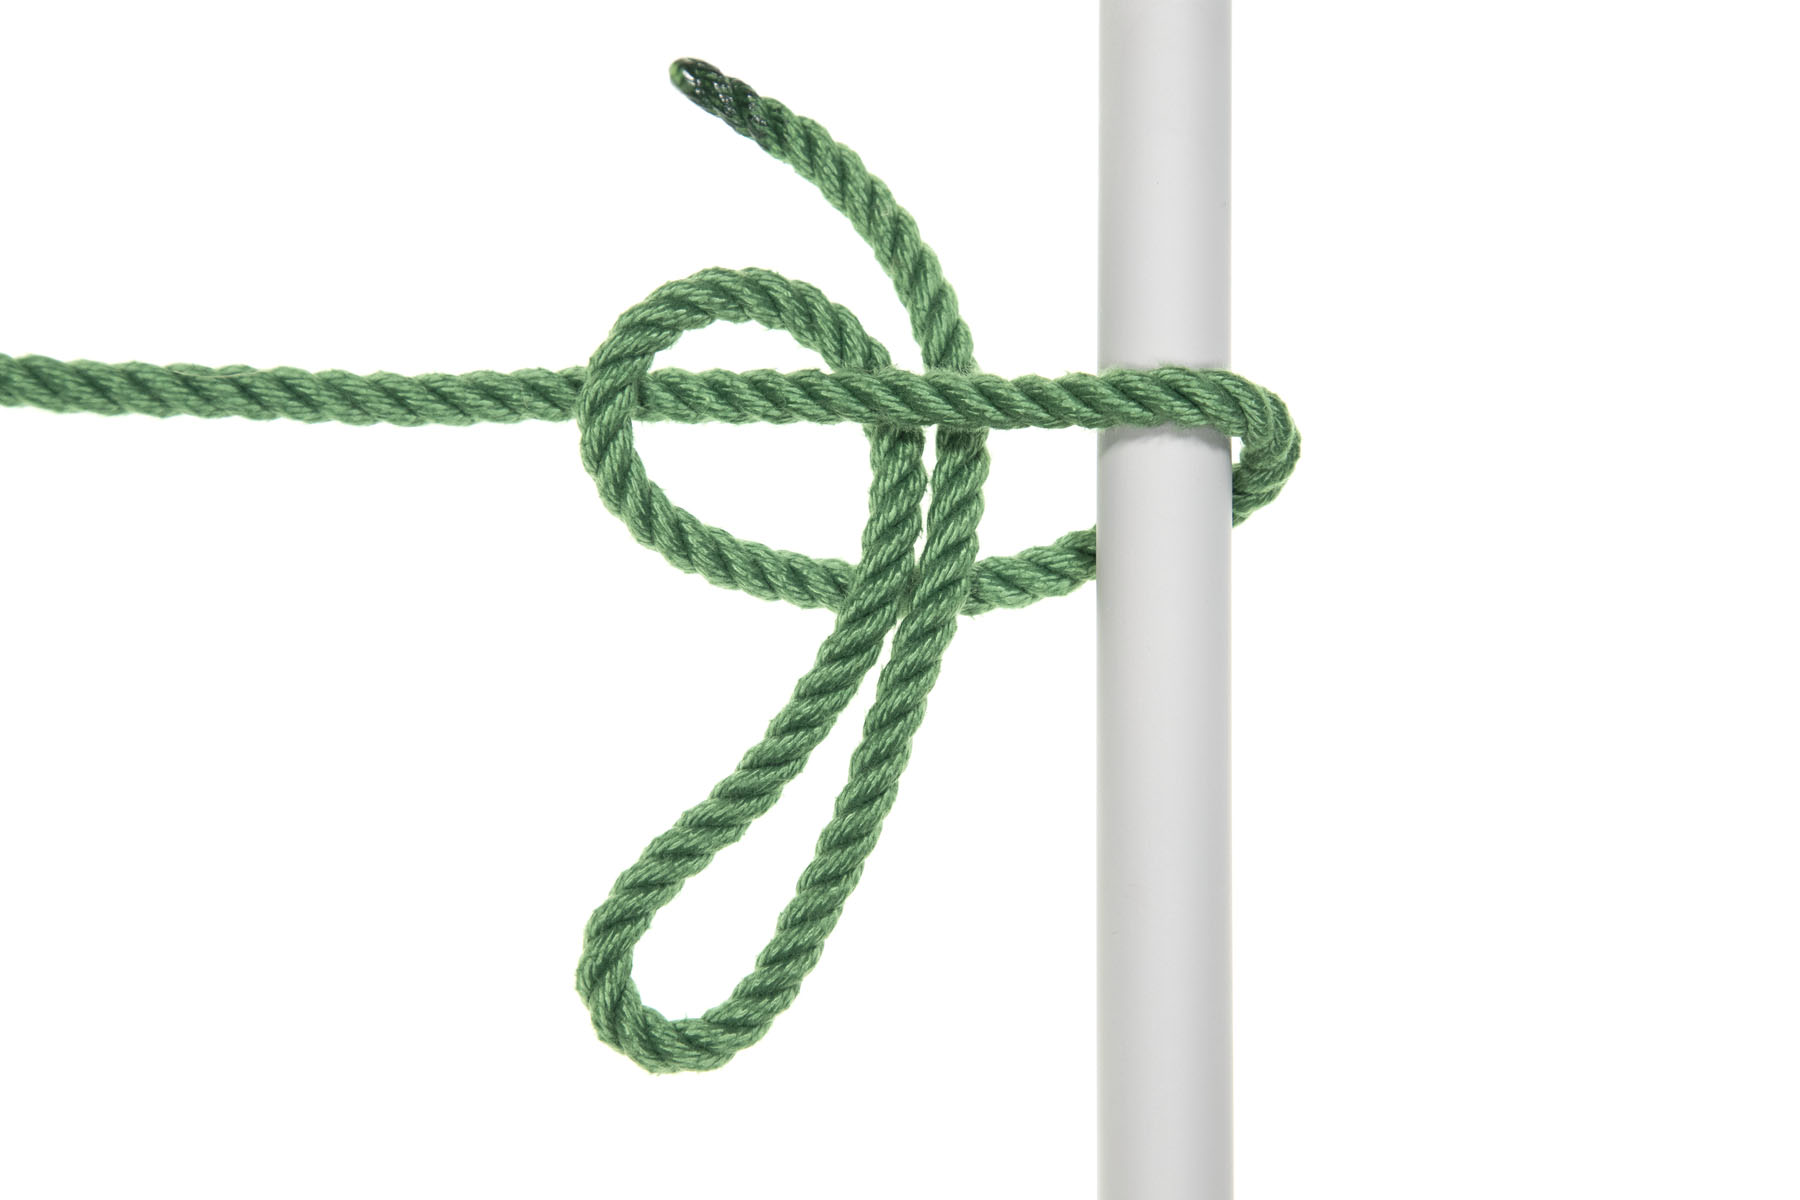 A one inch gray pole crosses the frame vertically. A green rope enters from the left and goes over the pole, doubles back under it, and crosses over the standing part. To this point, it looks exactly like a standard half hitch. But now, instead of passing the end of the rope under the standing part and over itself, the end of the rope is folded into a twelve inch bight bight and the bight crosses under the standing part and over the rope that passed under the pole. We are effectively tying a half hitch in the bight.